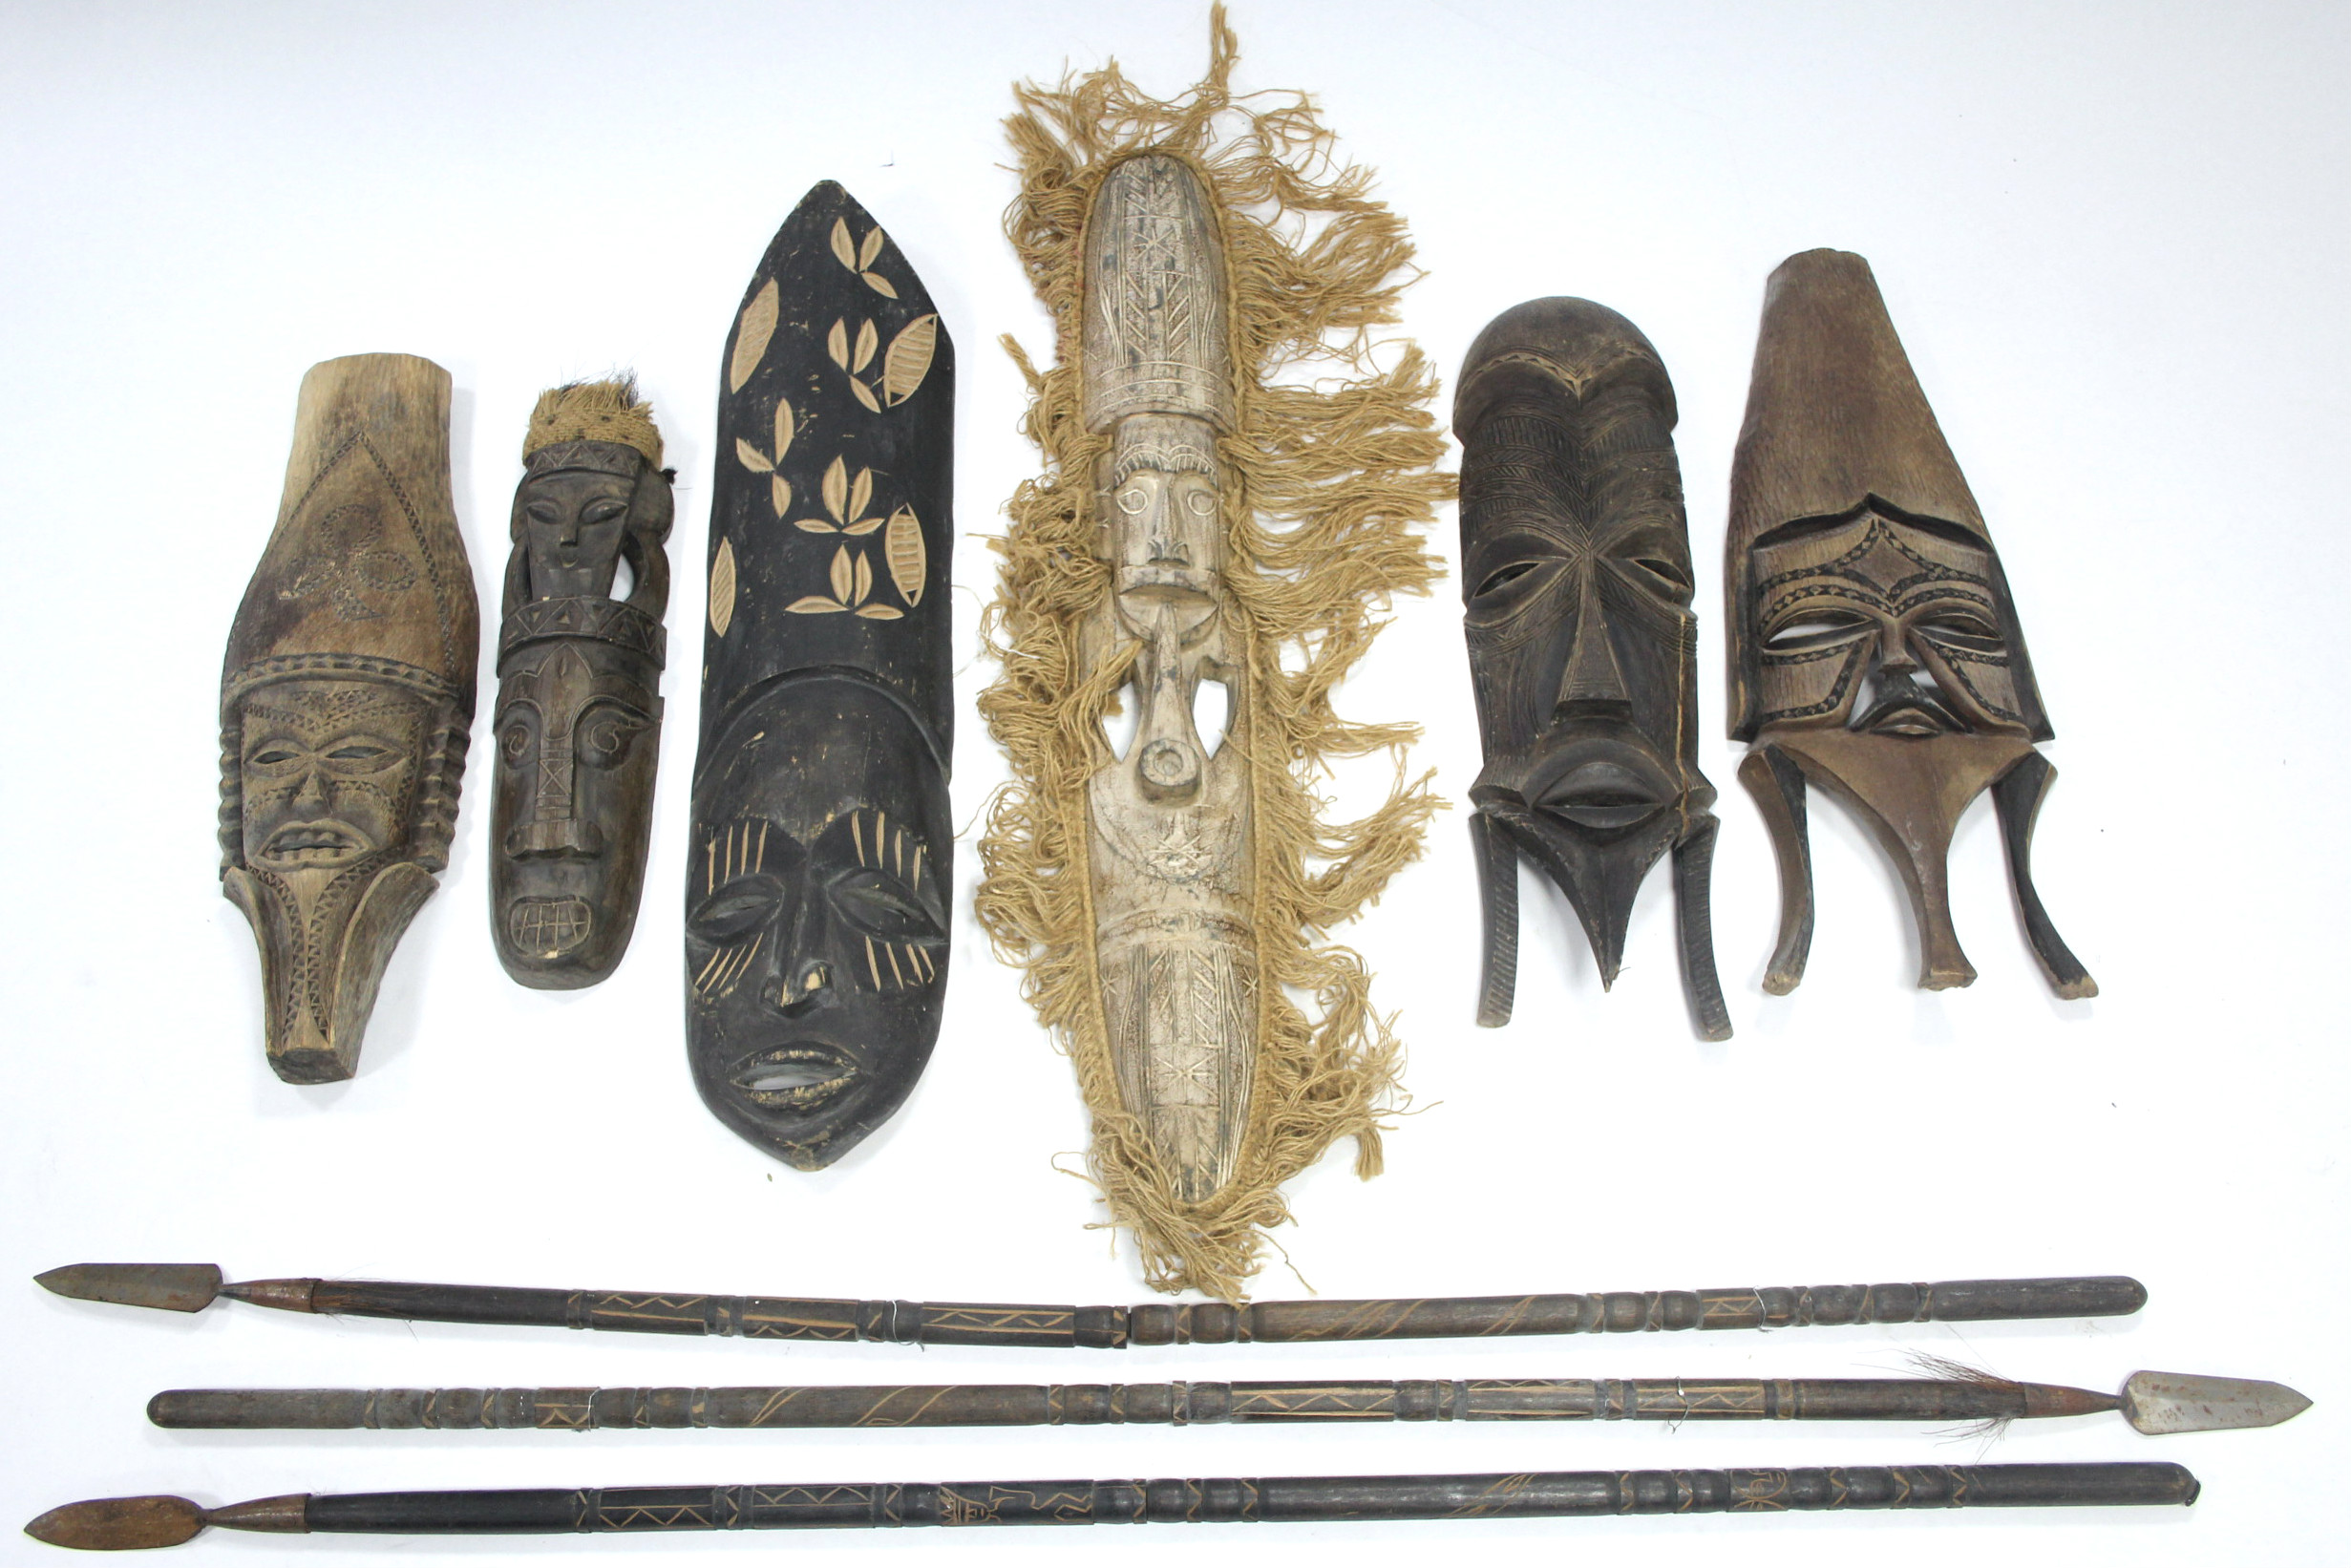 A collection of African artefacts including carved wood masks, spears, bows & arrows, fly-whisks,